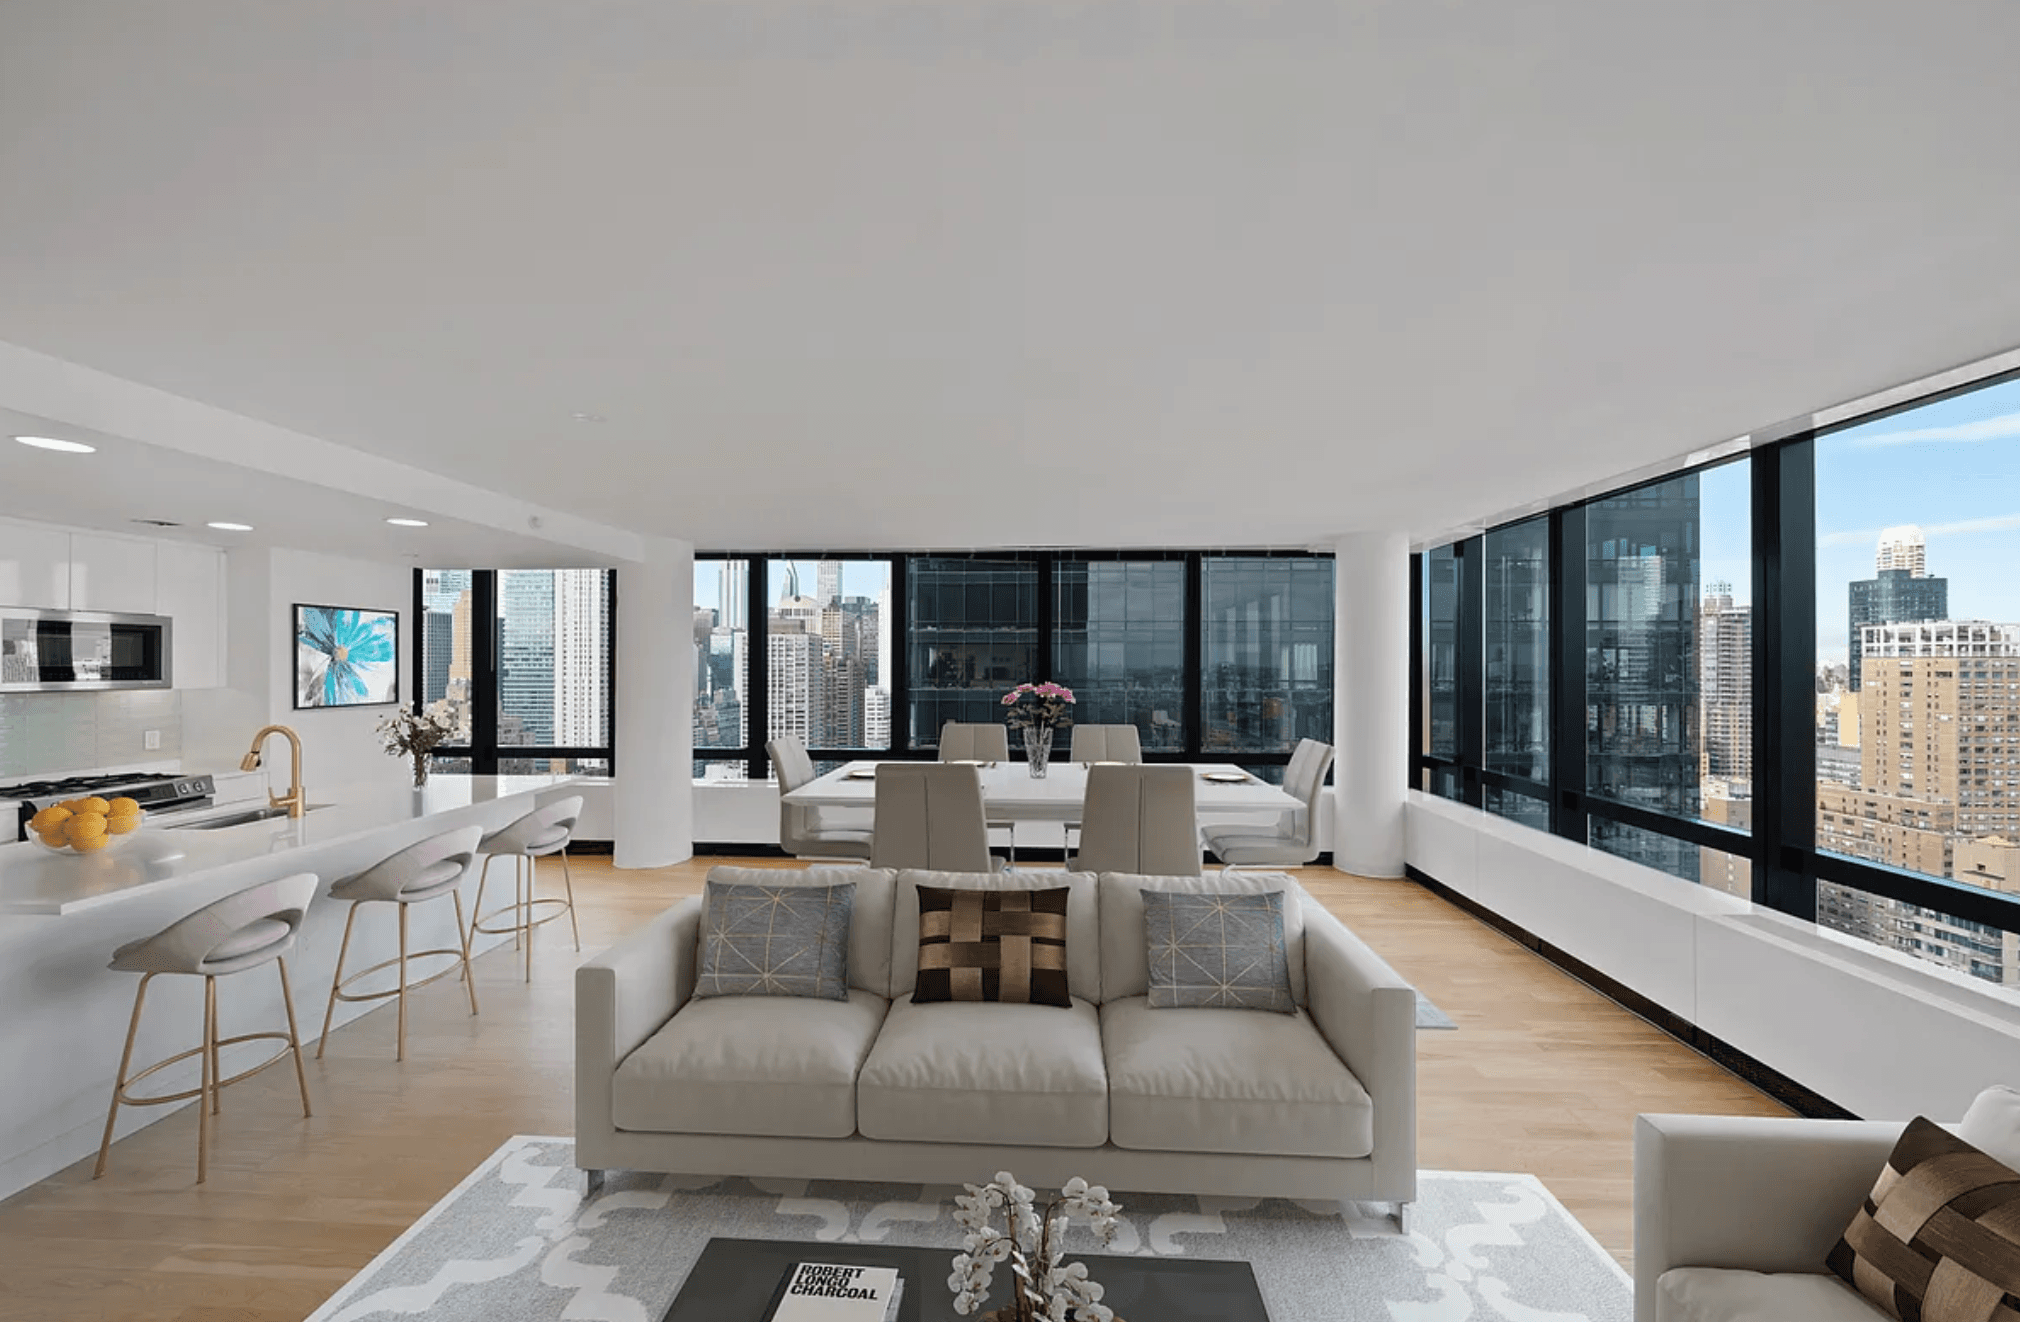 Unbeatable Views with this Spacious Upper East Side Three Bedroom Apartment